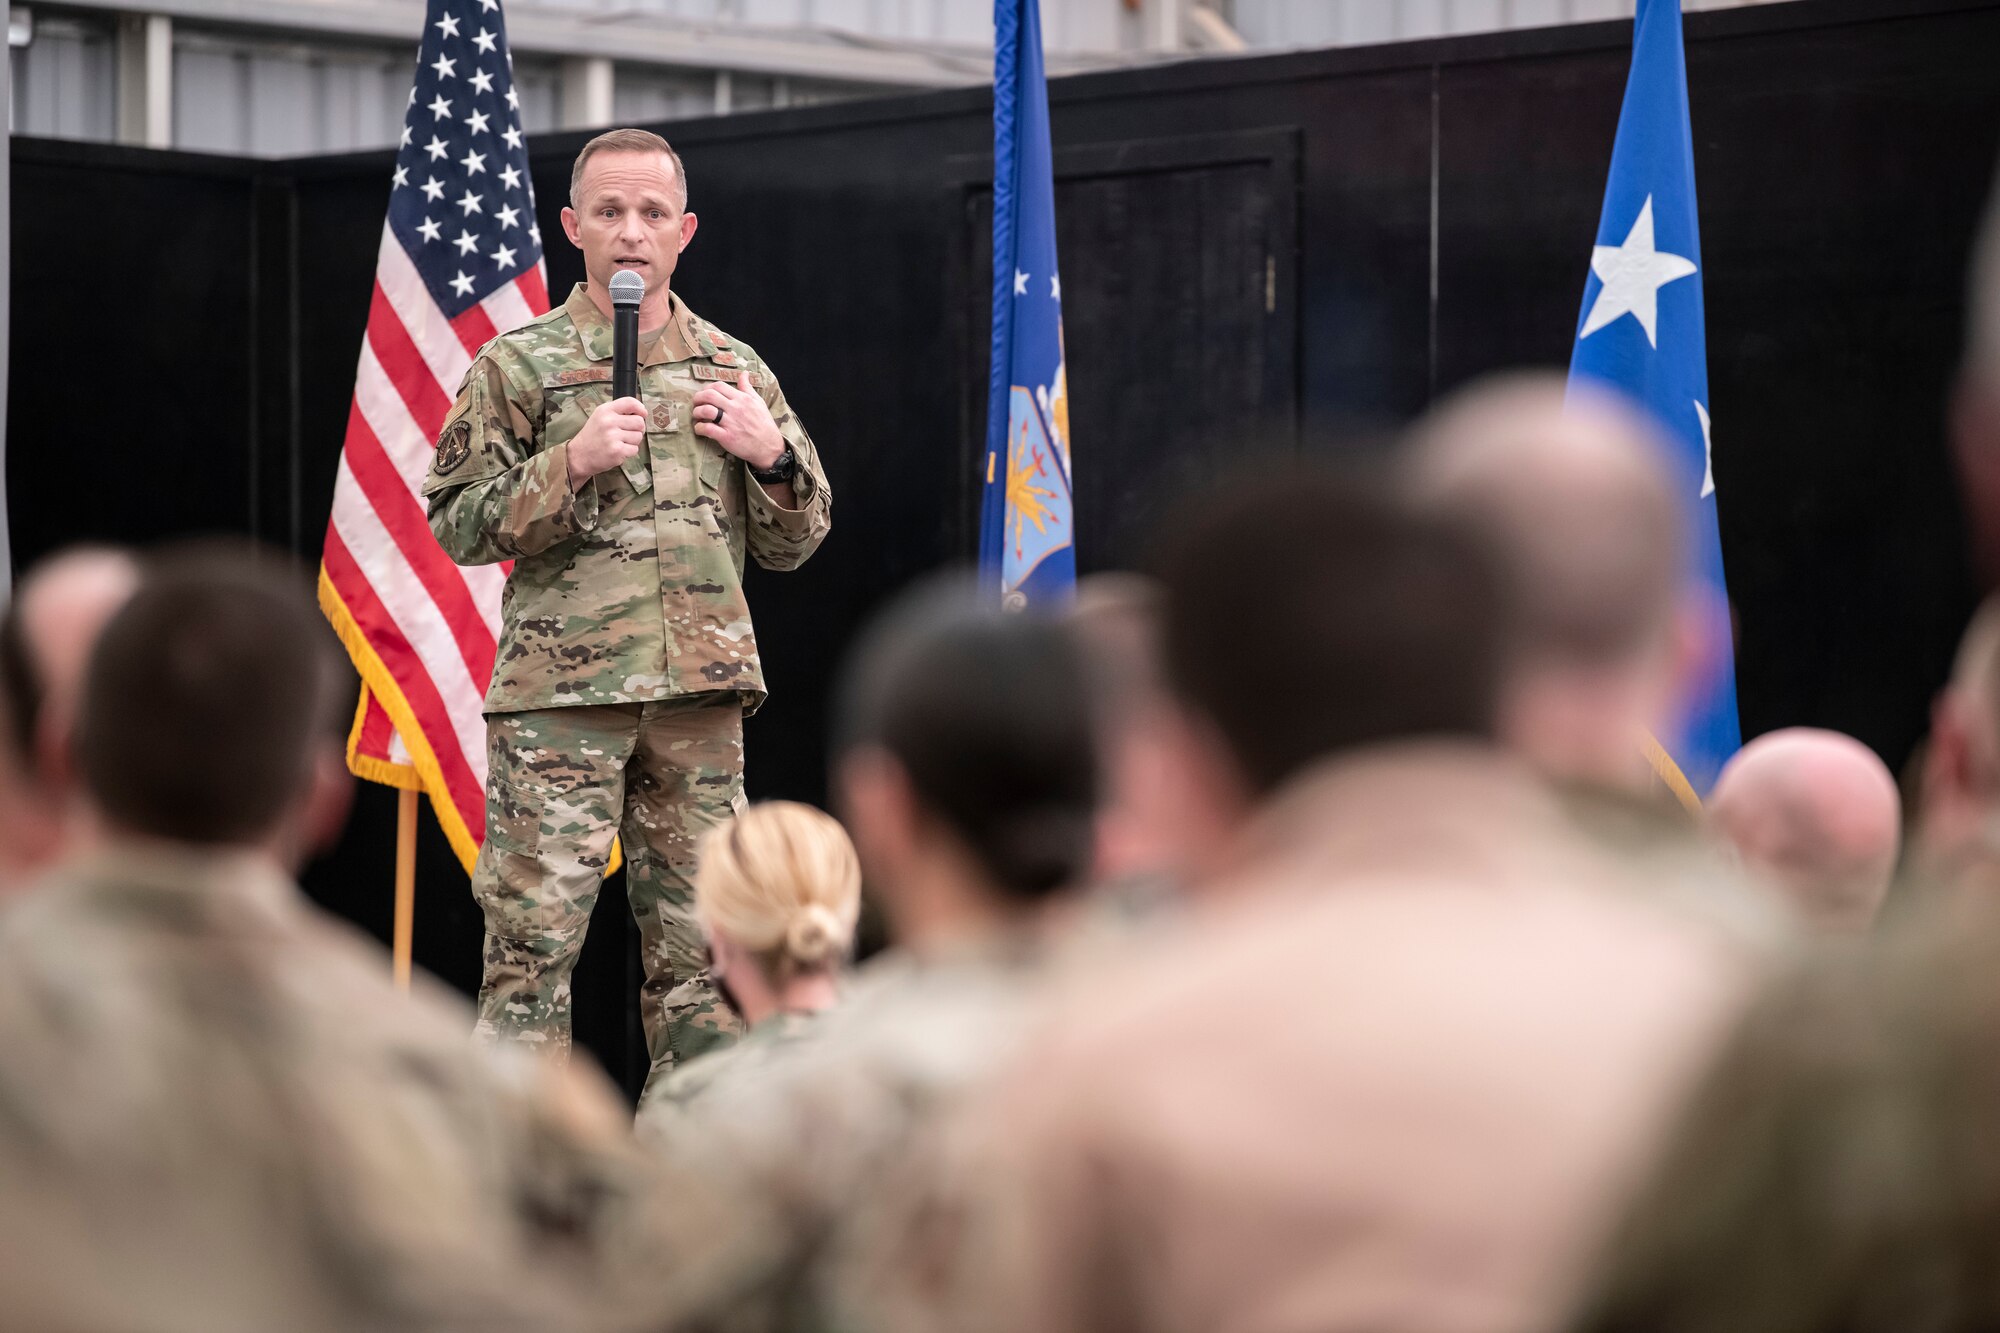 Chief Master Sgt. John Storms, U.S. Air Forces Central command chief, speaks to joint personnel during an all-call at Al Dhafra Air Base, United Arab Emirates, Sept. 27, 2020.